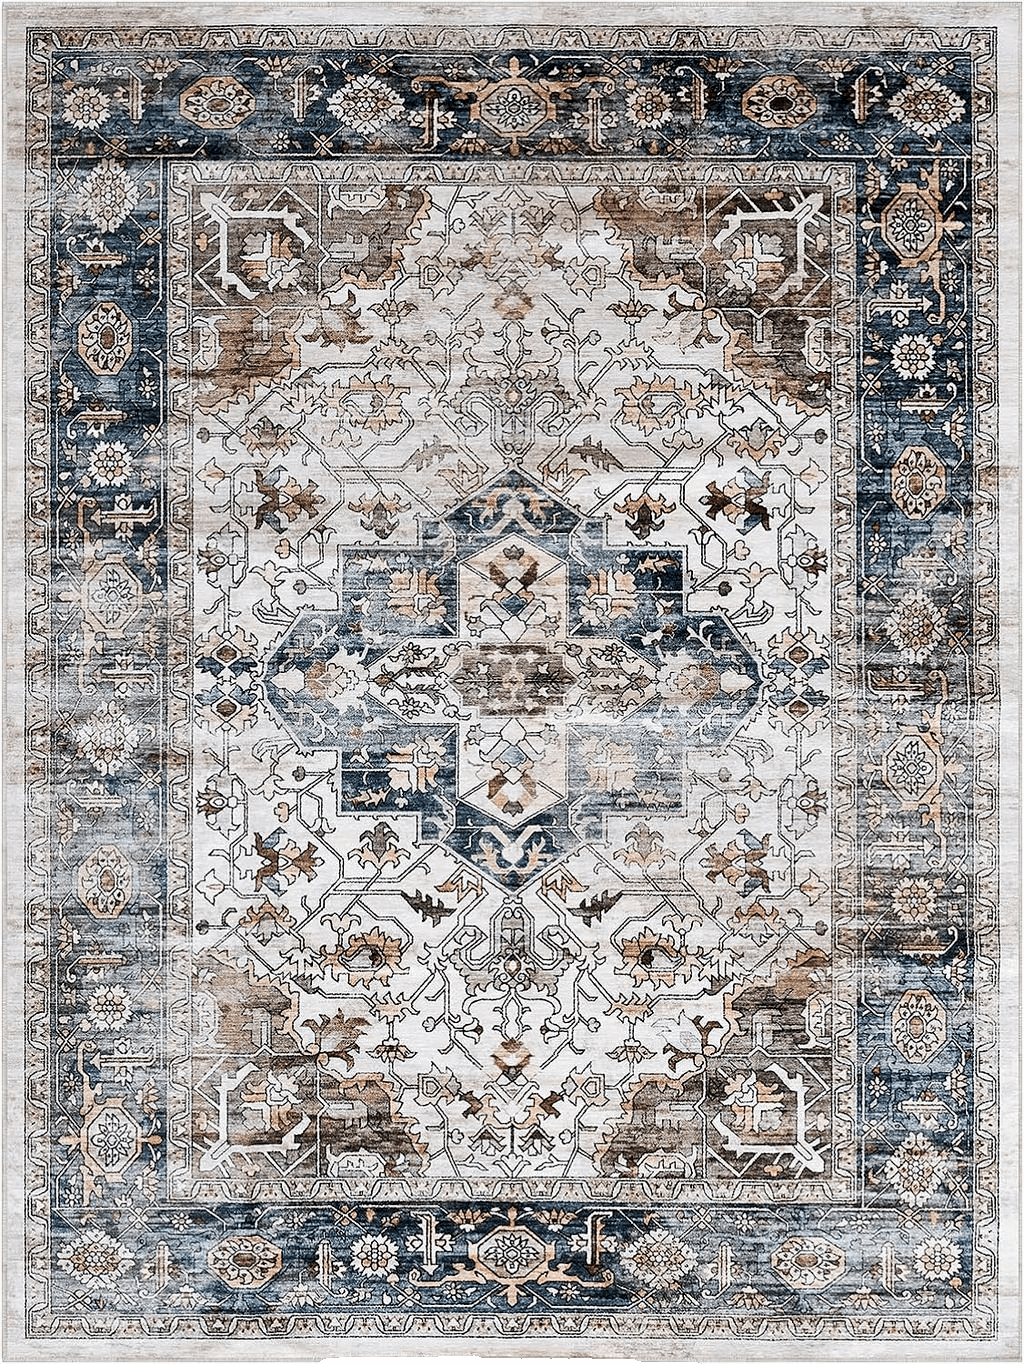 Blue 8x10 Area Rugs for Living Room: Washable Rugs Carpet for Living Room with Non-Slip Backing Non-Shedding Stain Resistant, Boho Floral Large Rugs for Dining Room Nursery Home Office (Blue Multi)